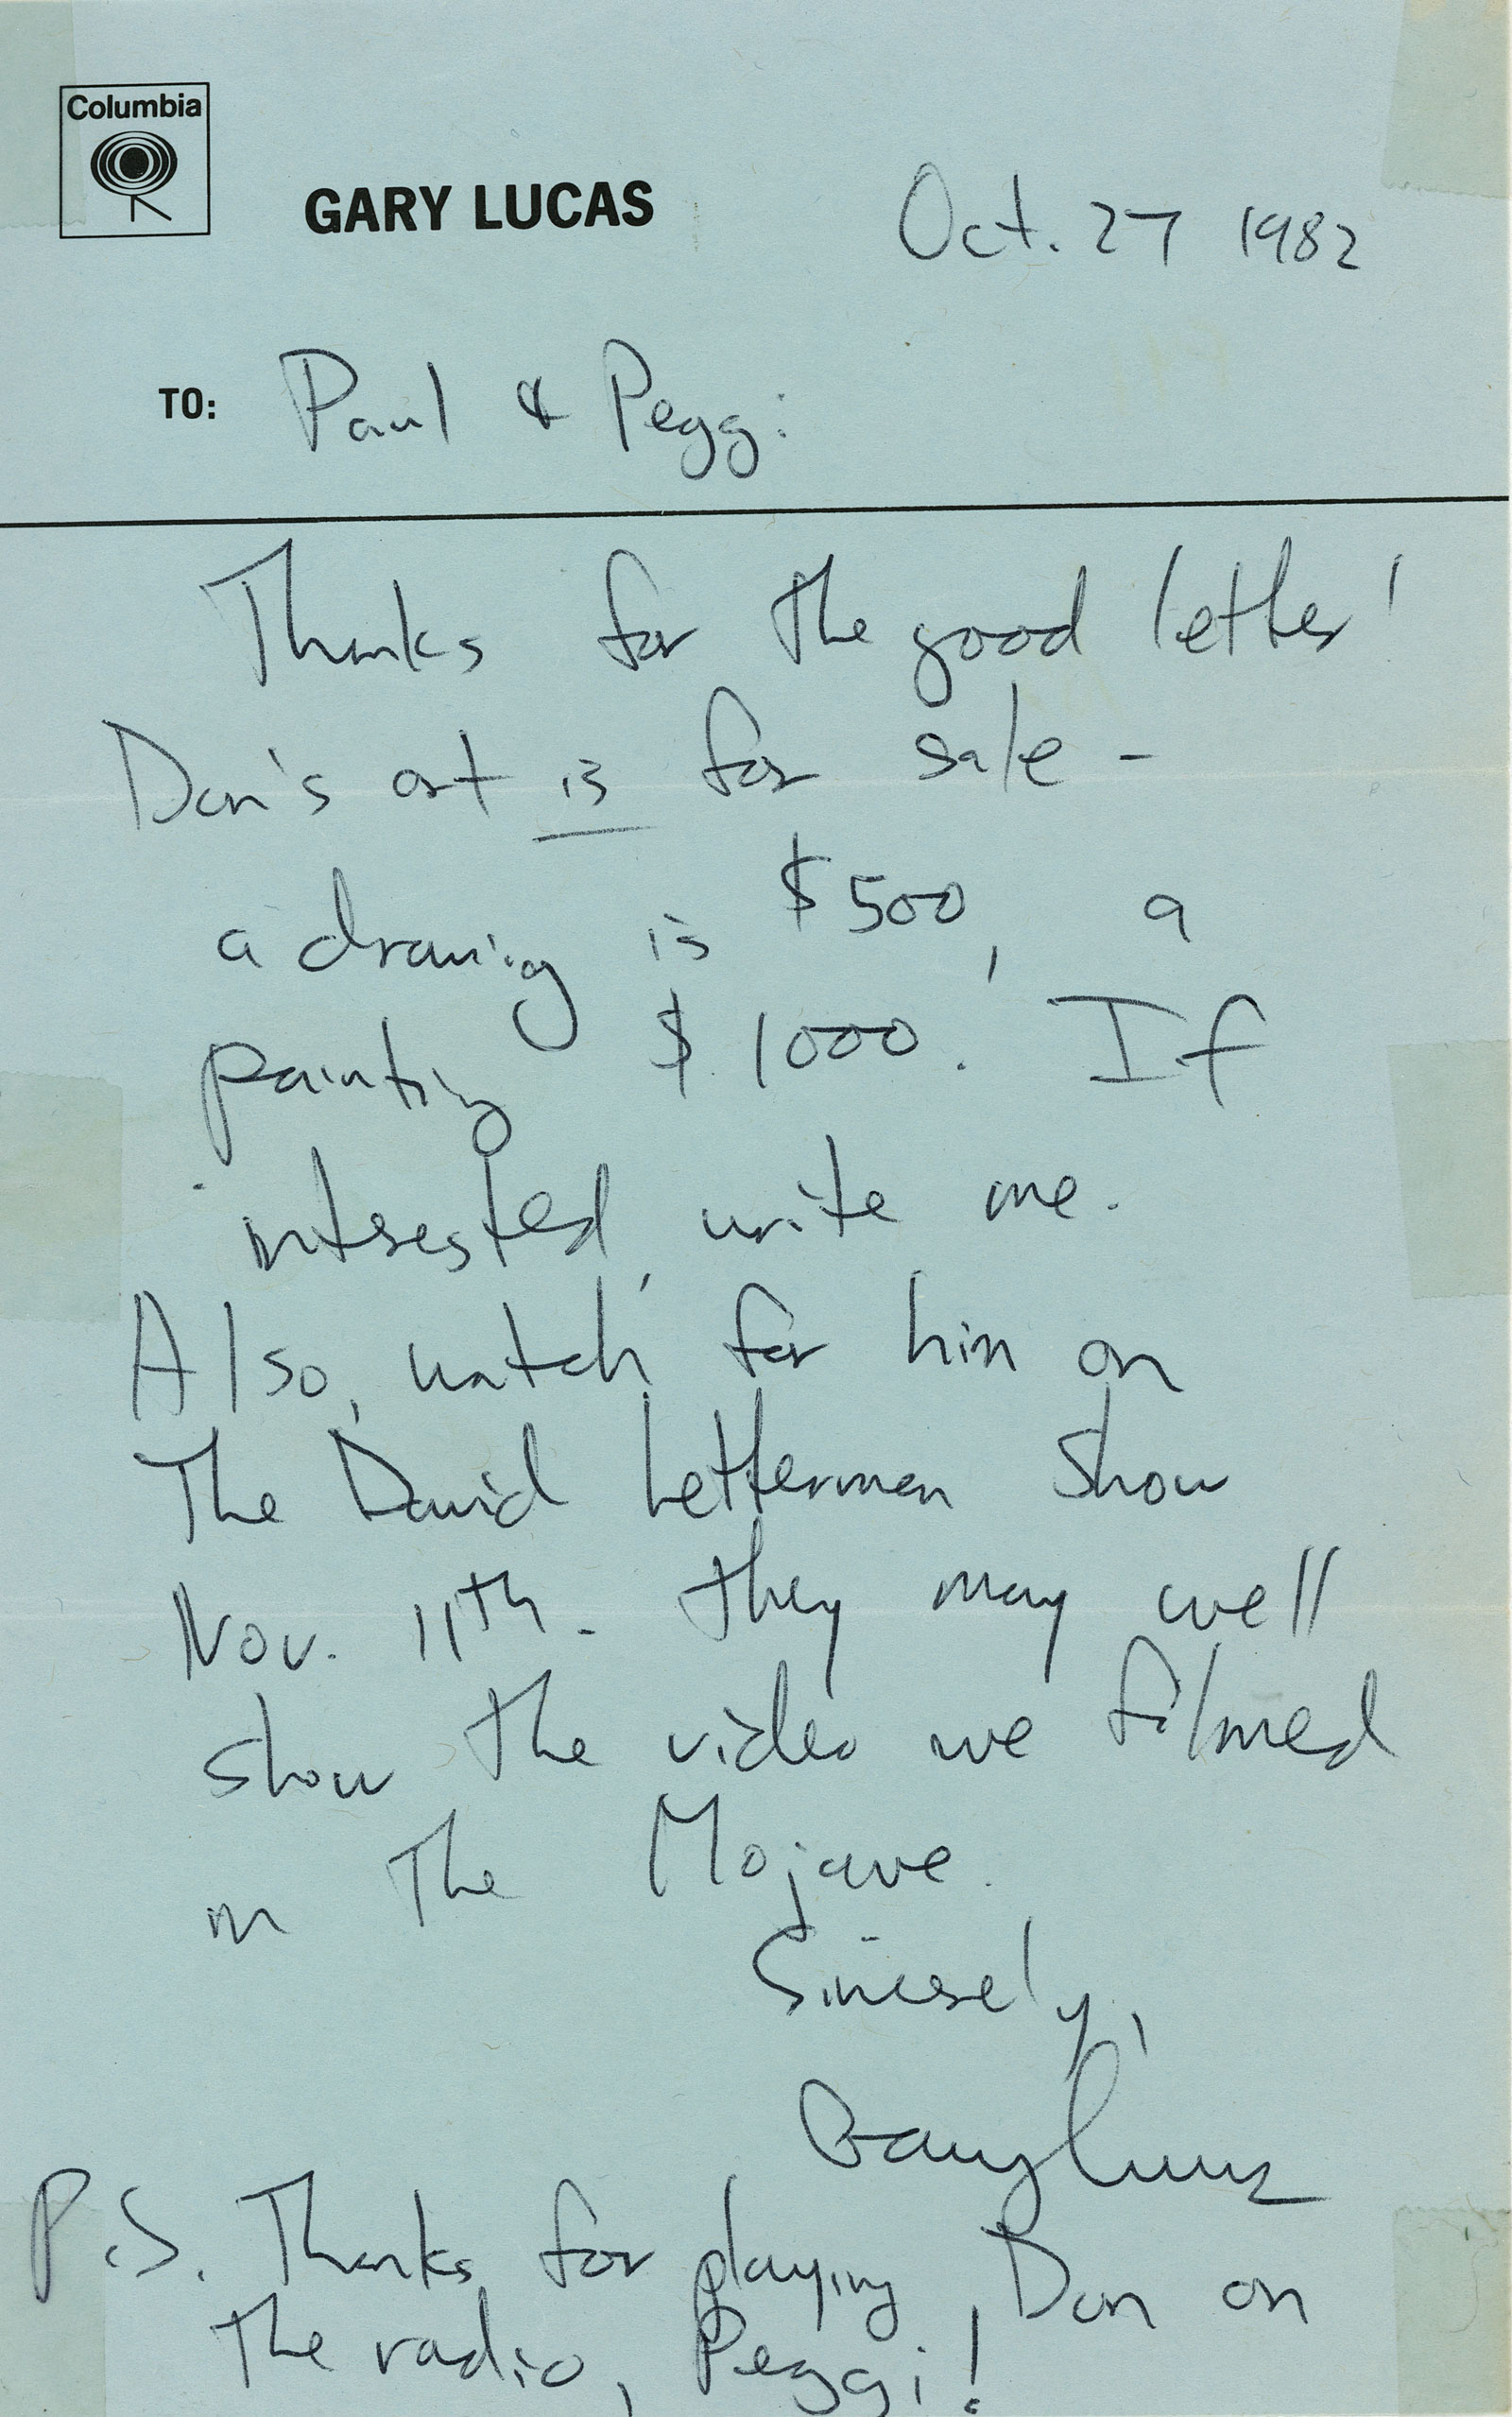 1982 letter from Gary Lucas concerning our inquiry about purchasing Don Van Vliet artwork.